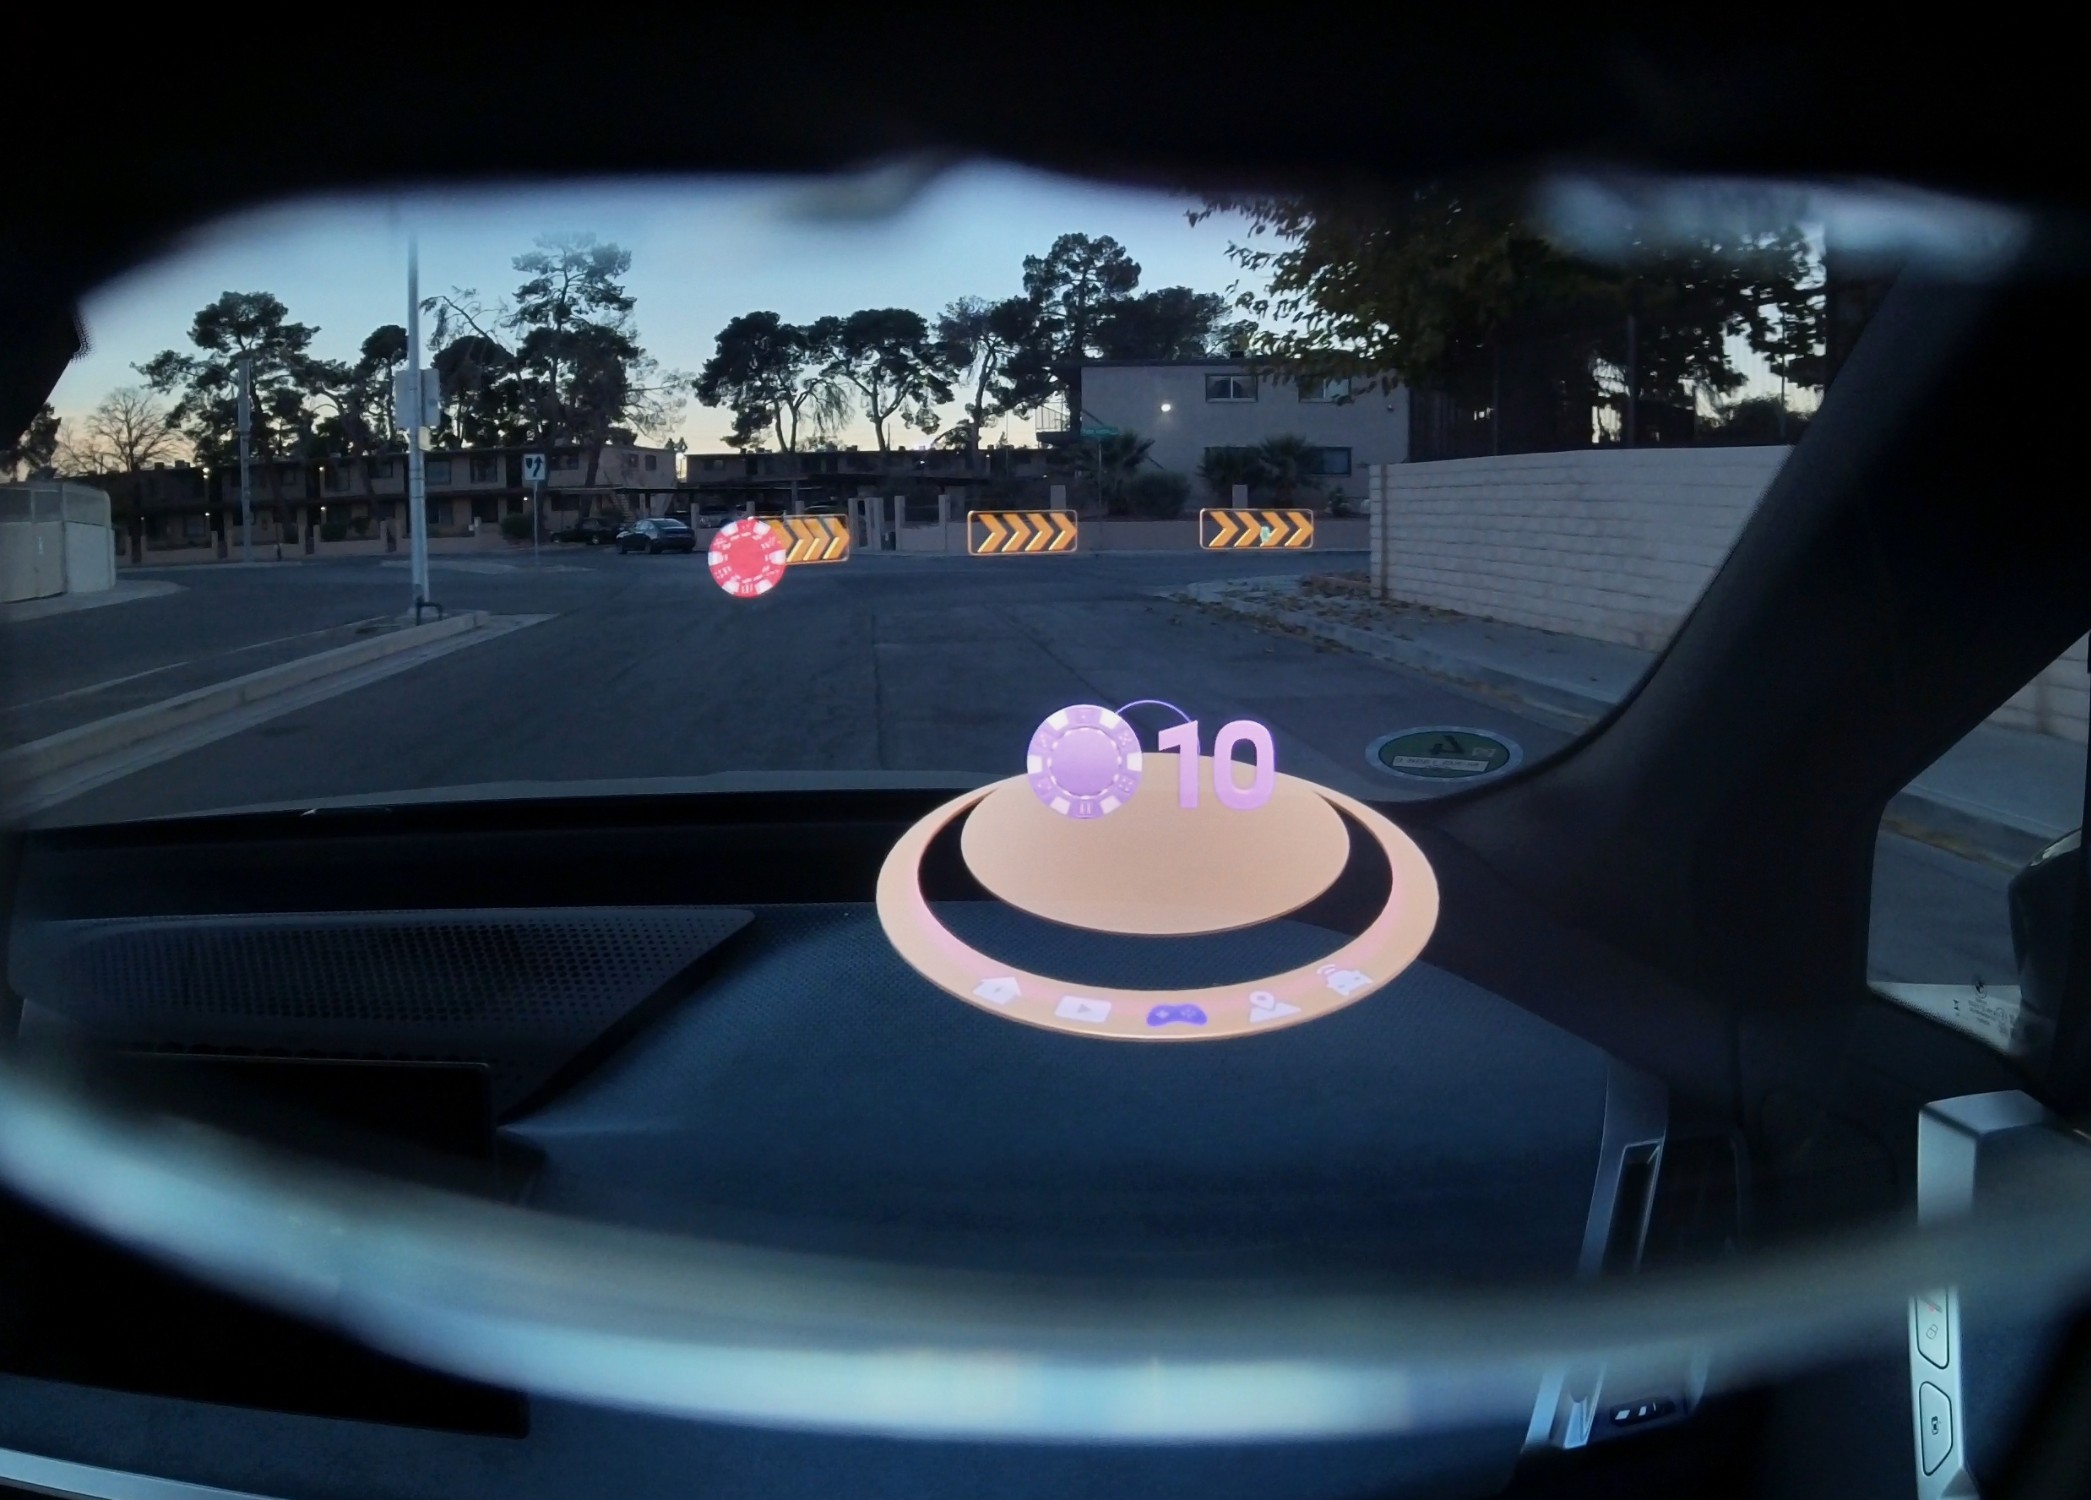 BMW AR Ride Joint development demo with XREAL